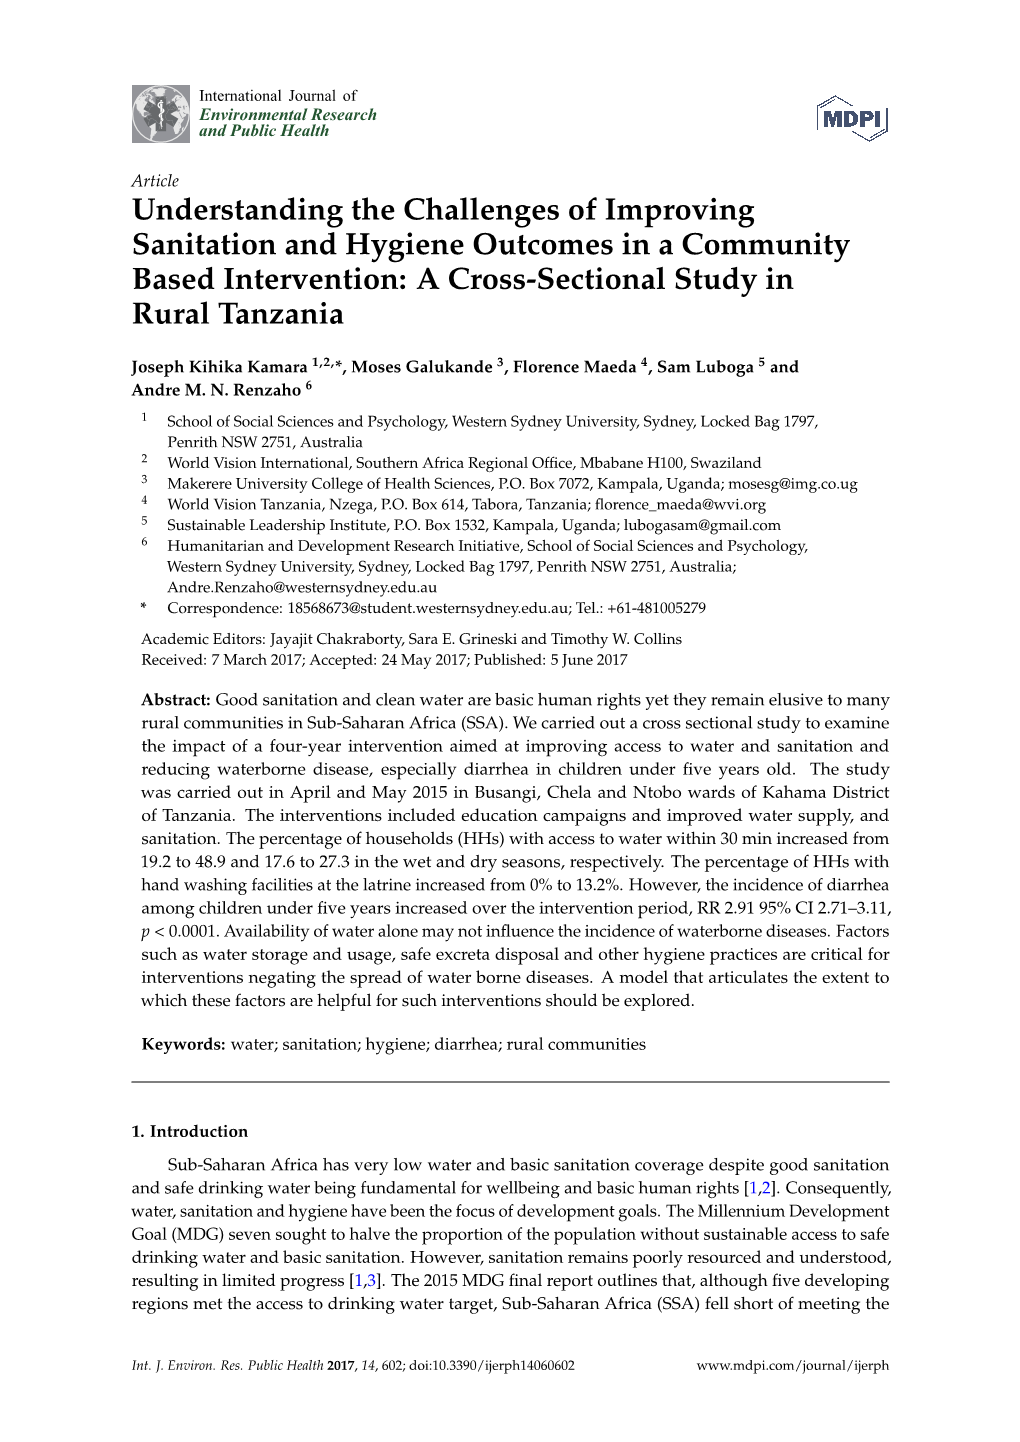 Understanding the Challenges of Improving Sanitation and Hygiene Outcomes in a Community Based Intervention: a Cross-Sectional Study in Rural Tanzania